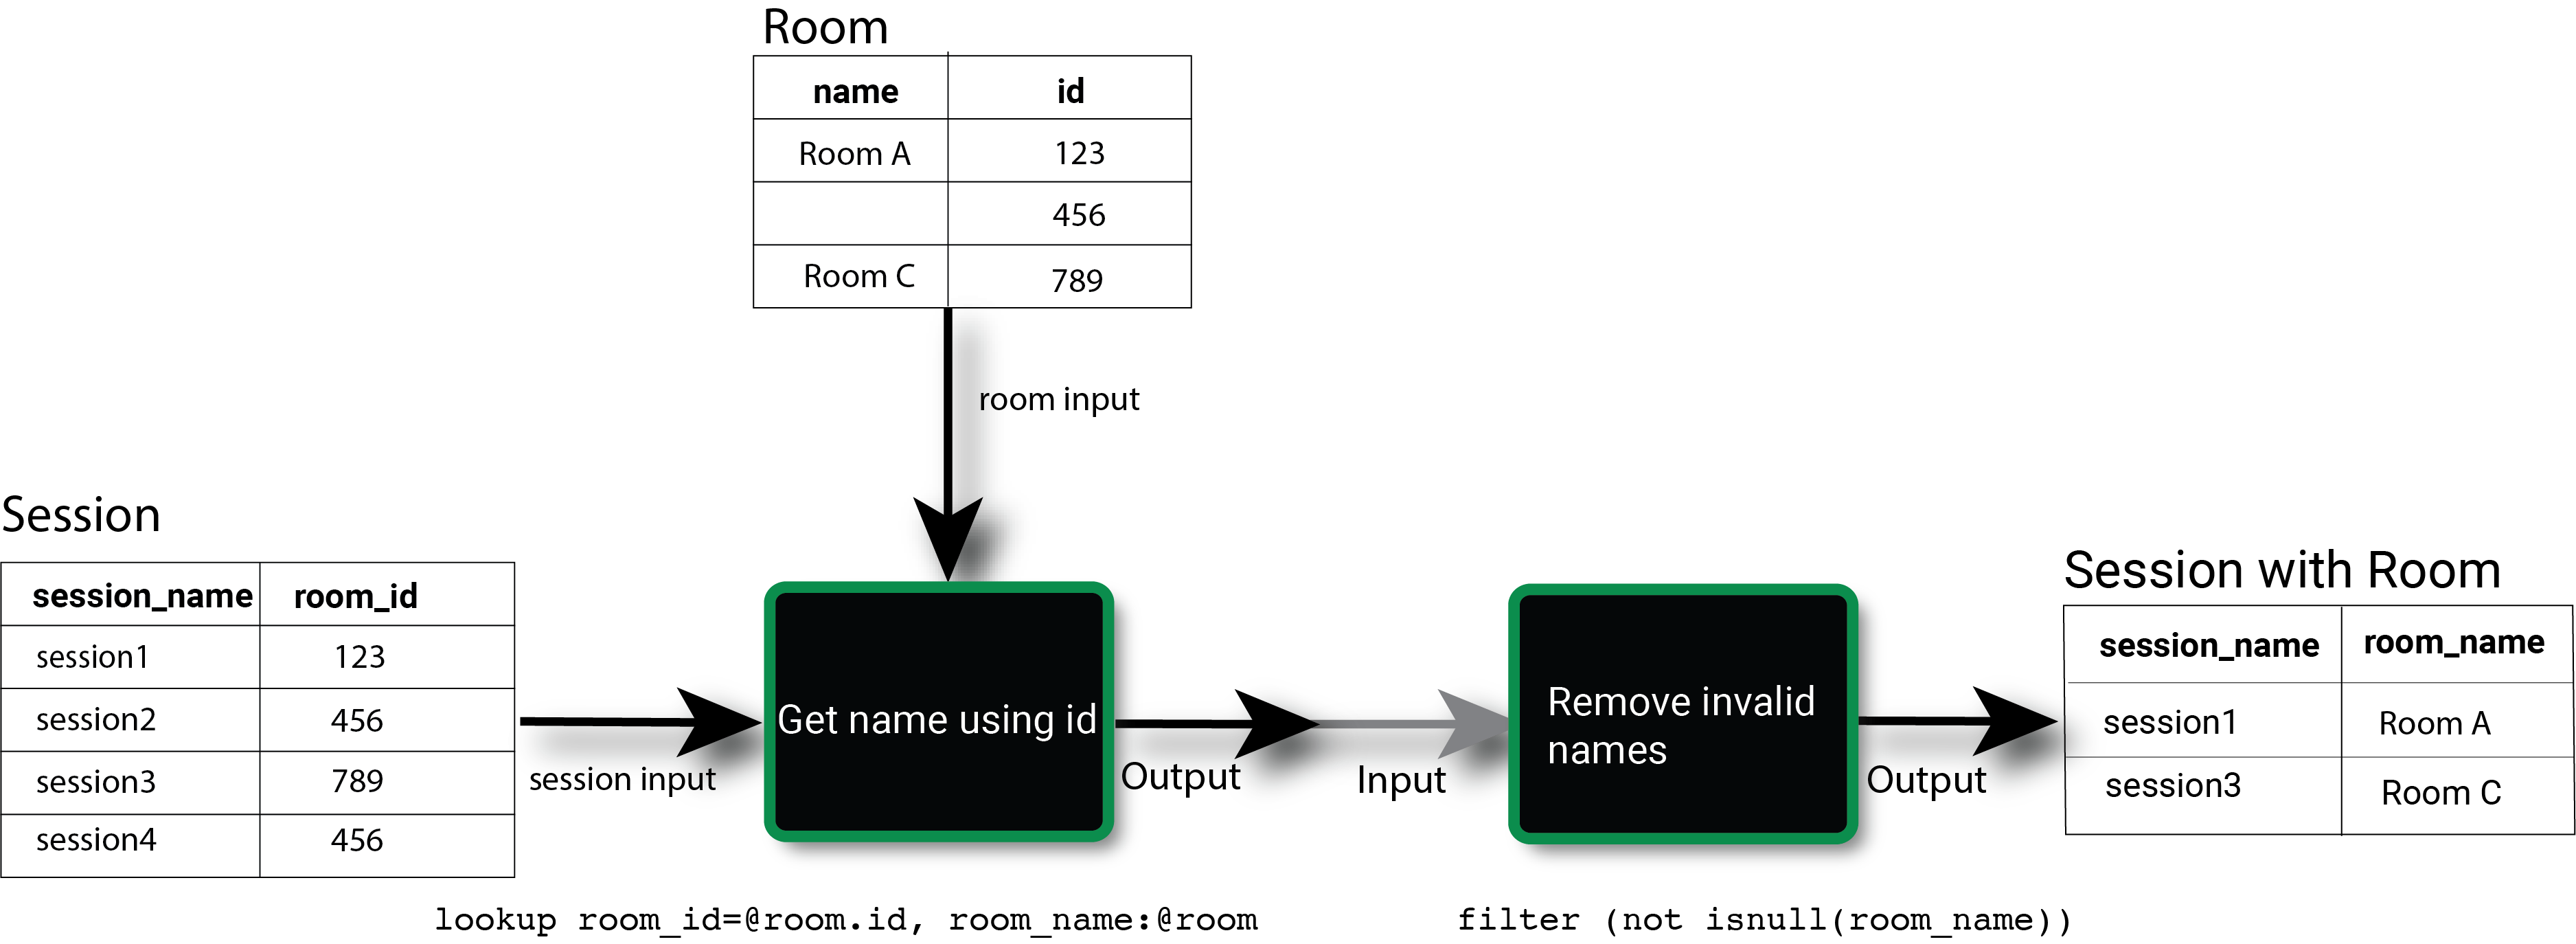 Diagram of a lookup and filter example. Session and room data in, lookup room name from room dataset by id, filter to get only sessions with non-null room names.